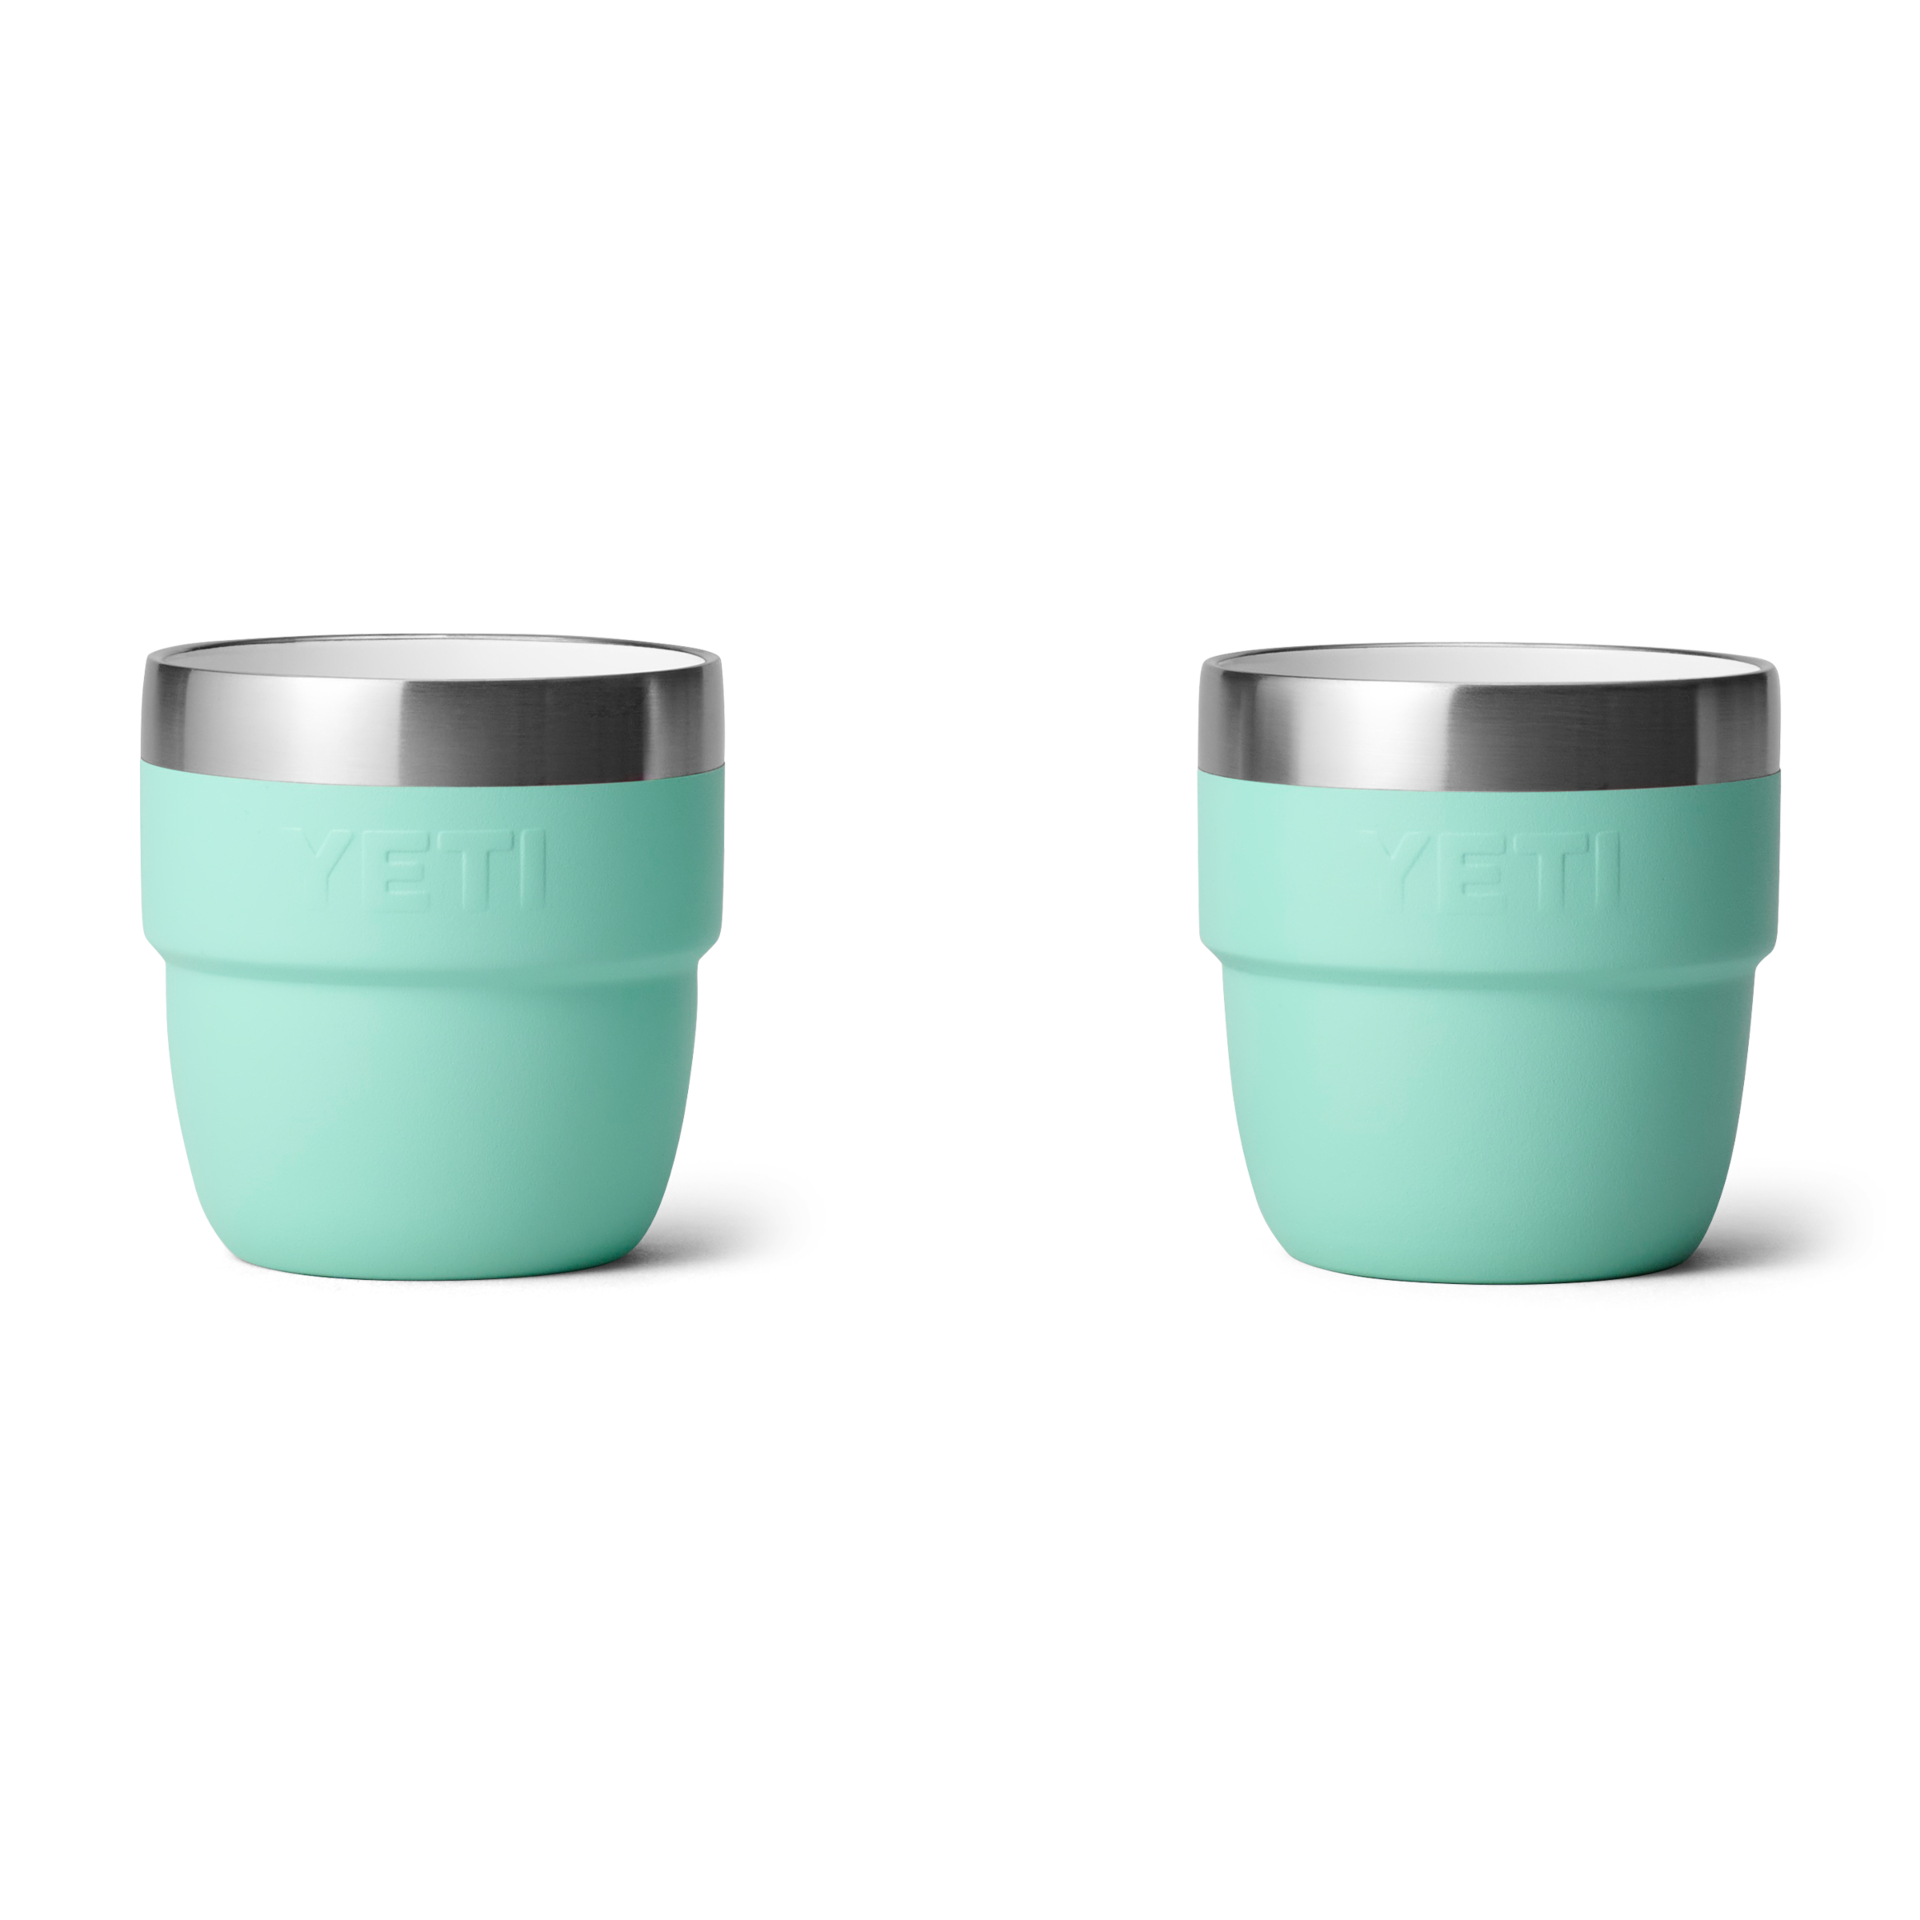 4 oz. / 118ml Stackable Cups - Seafoam (2 pack)